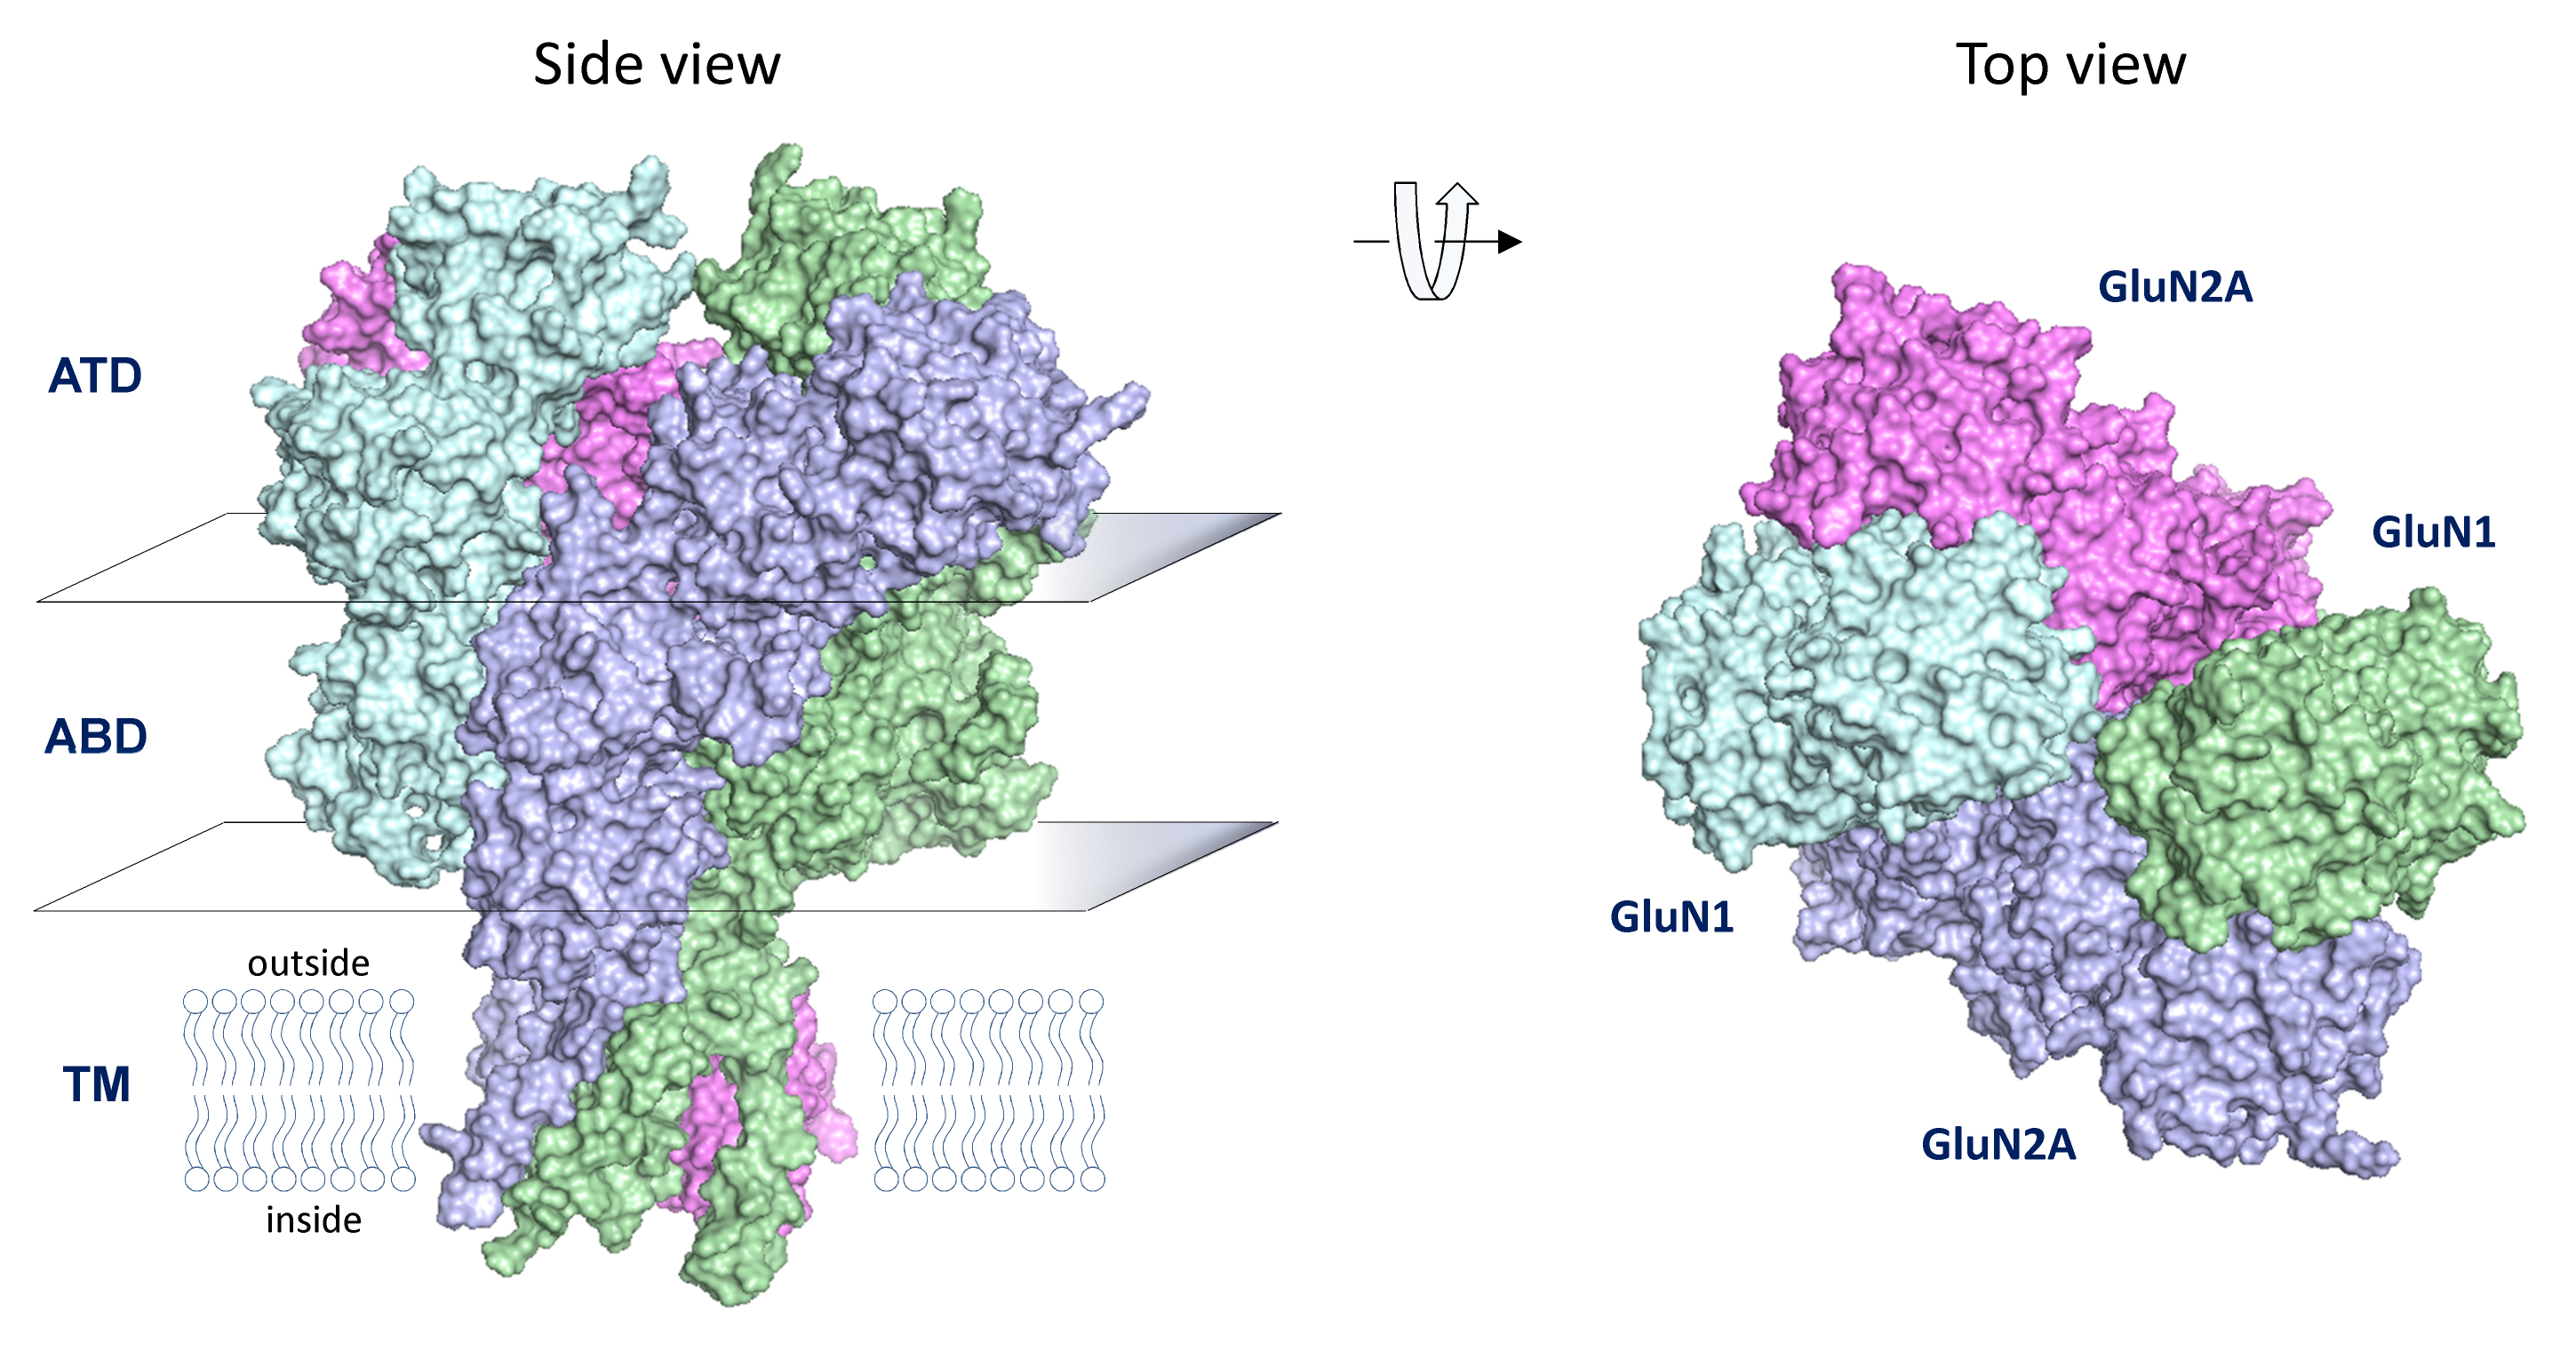 GRID genes encoding GluD subunits  GluD1 and GluD2 are two proteins with significant sequence similarity to other members of the glutamate receptors family, and are encoded by GRID1 and GRID2. These receptors, known as δ (delta) receptors, are poorly understood. It is unclear whether they form functional ion channels in the brain, yet they appear to have important roles in neuronal development.  These transmembrane proteins may form binding partners for presynaptic proteins to play a role in synapse organization and some forms of synaptic plasticity.